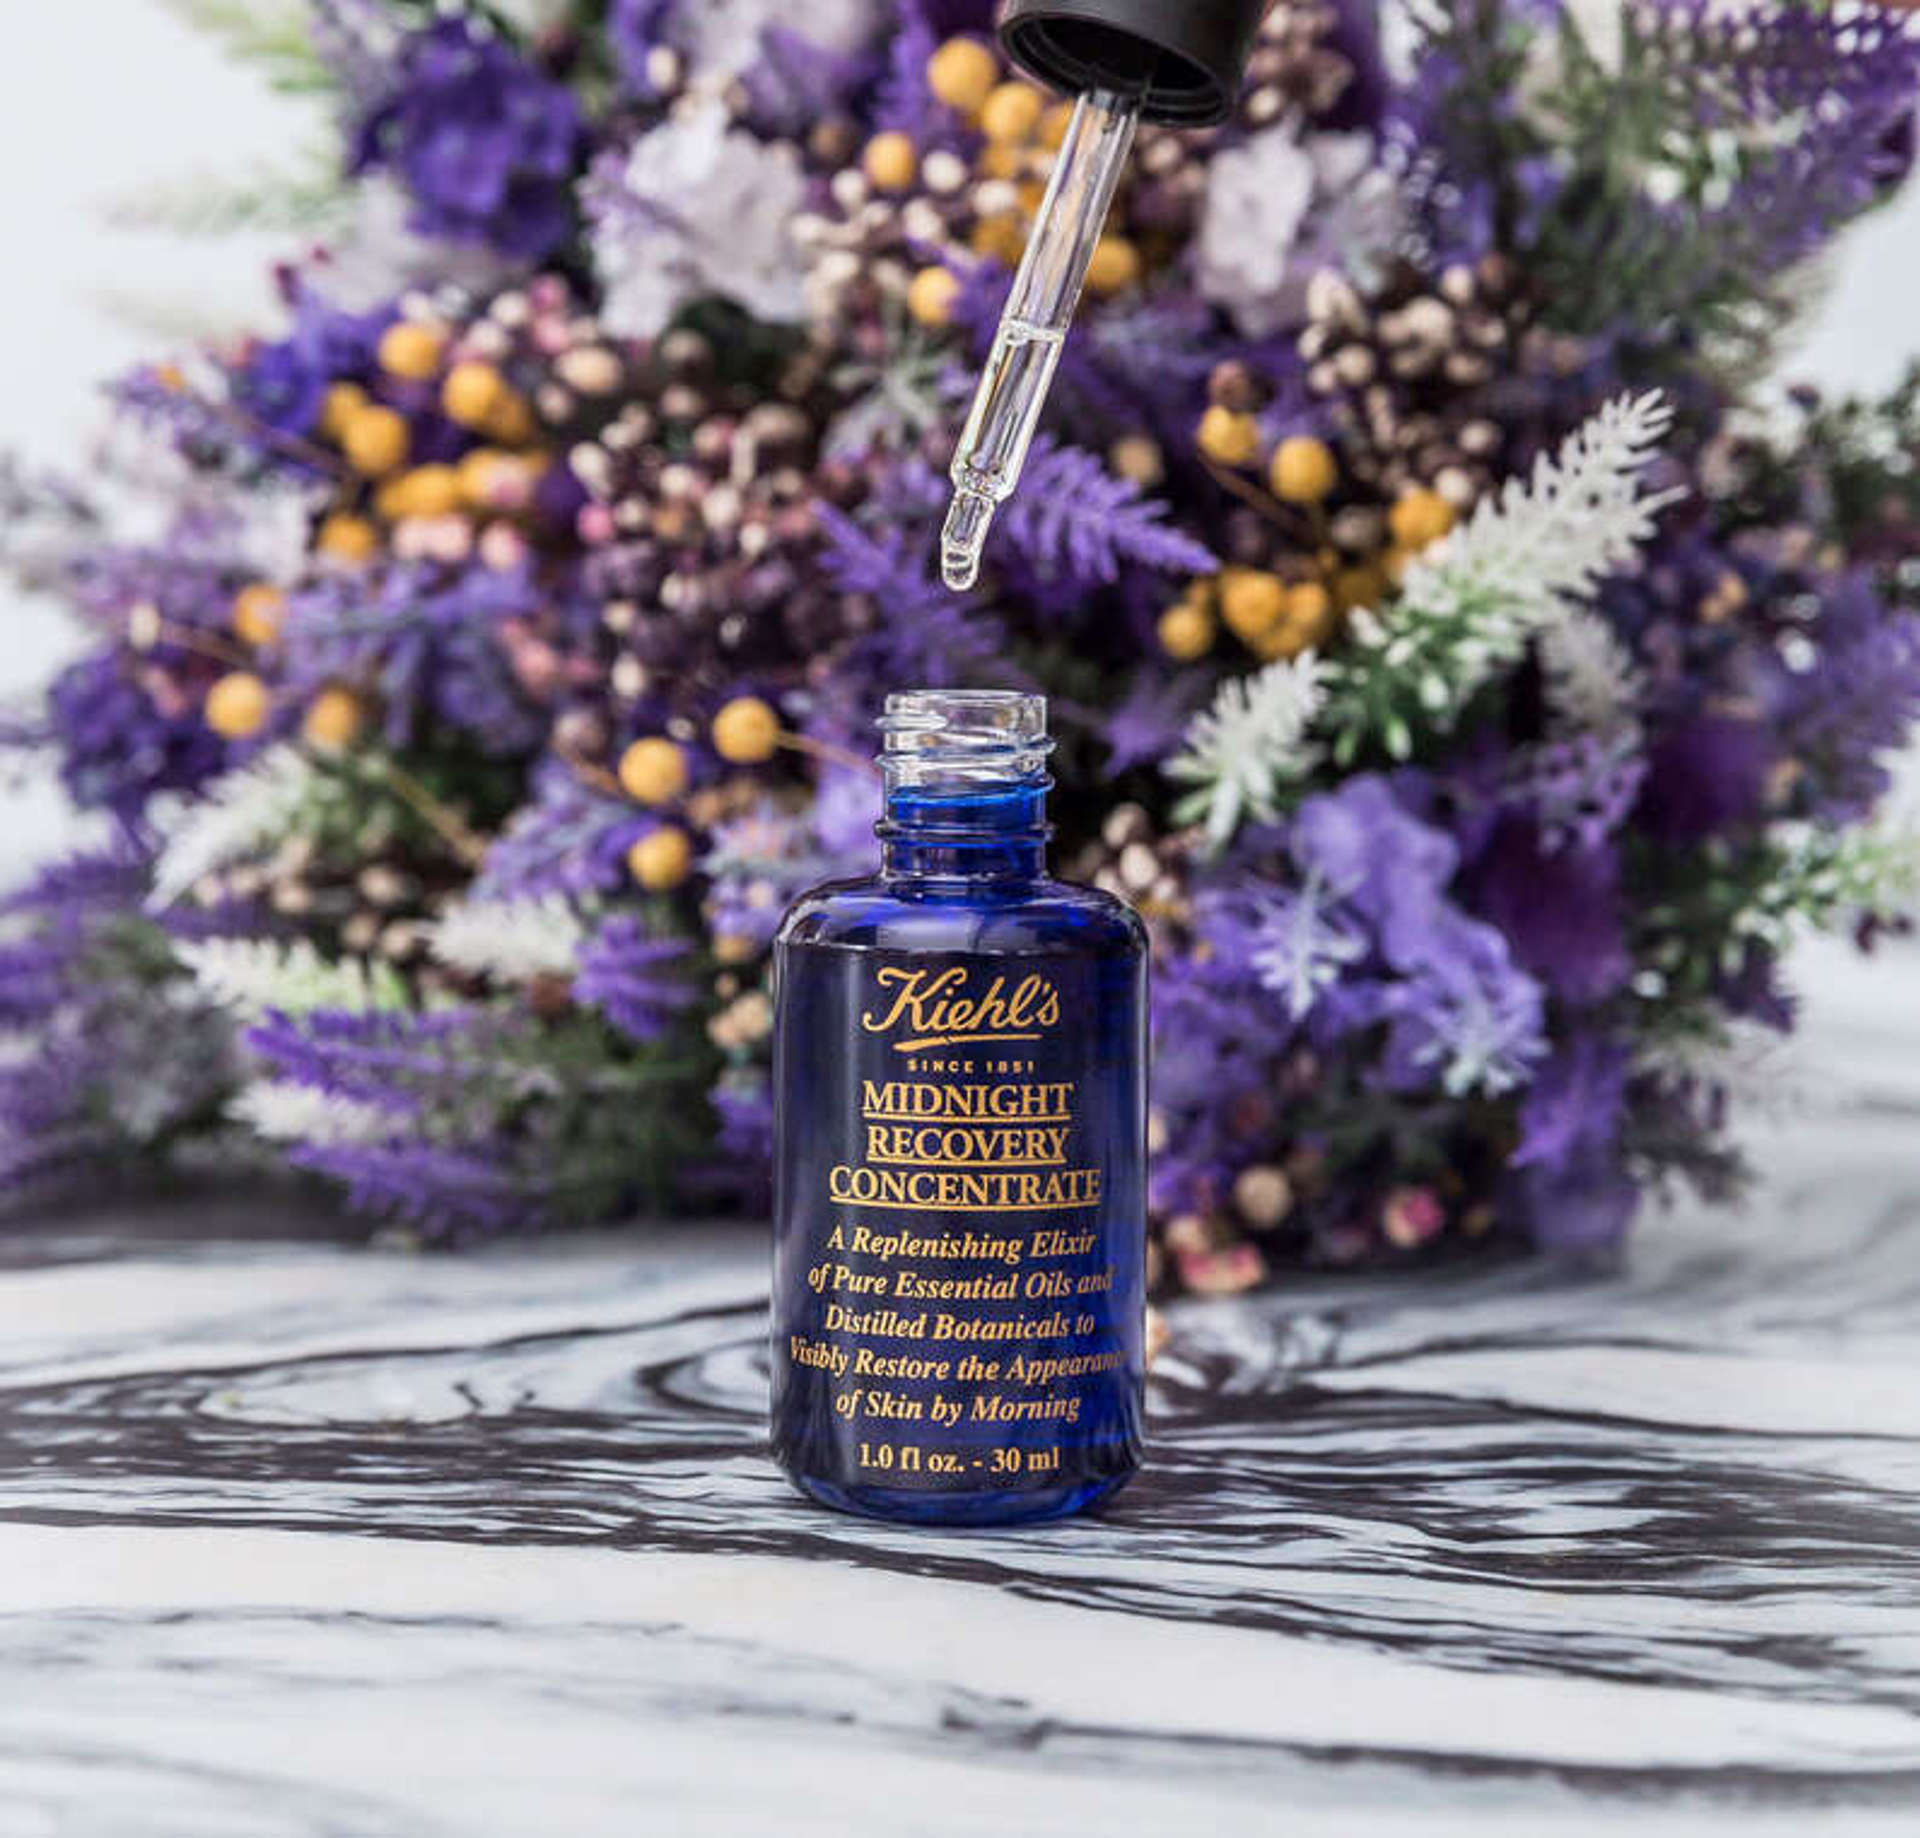 Kiehl’s Midnight Recovery Concentrate Serum